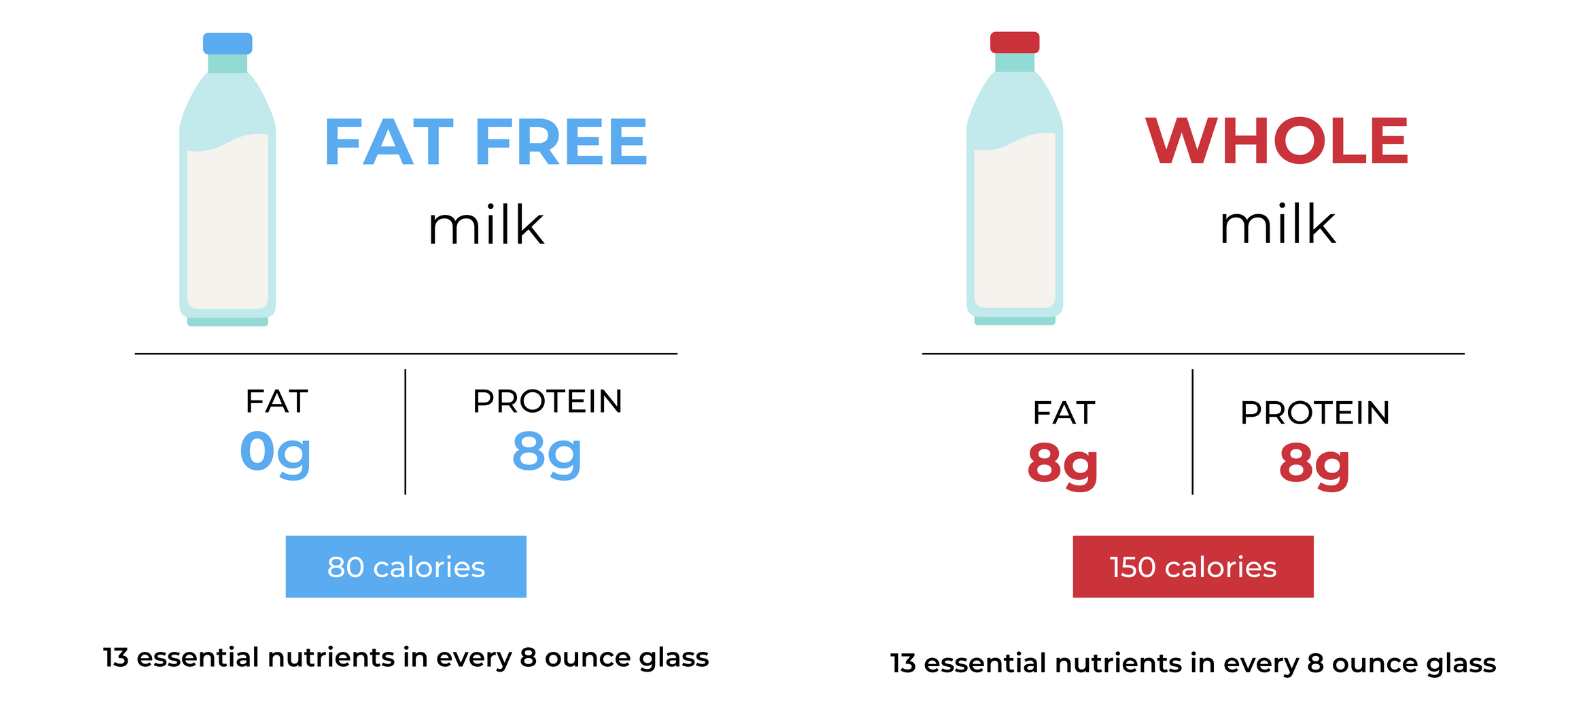 https://www.newenglanddairy.com/wp-content/uploads/fat-free-vs.-whole-milk-nutrition-graphic.png